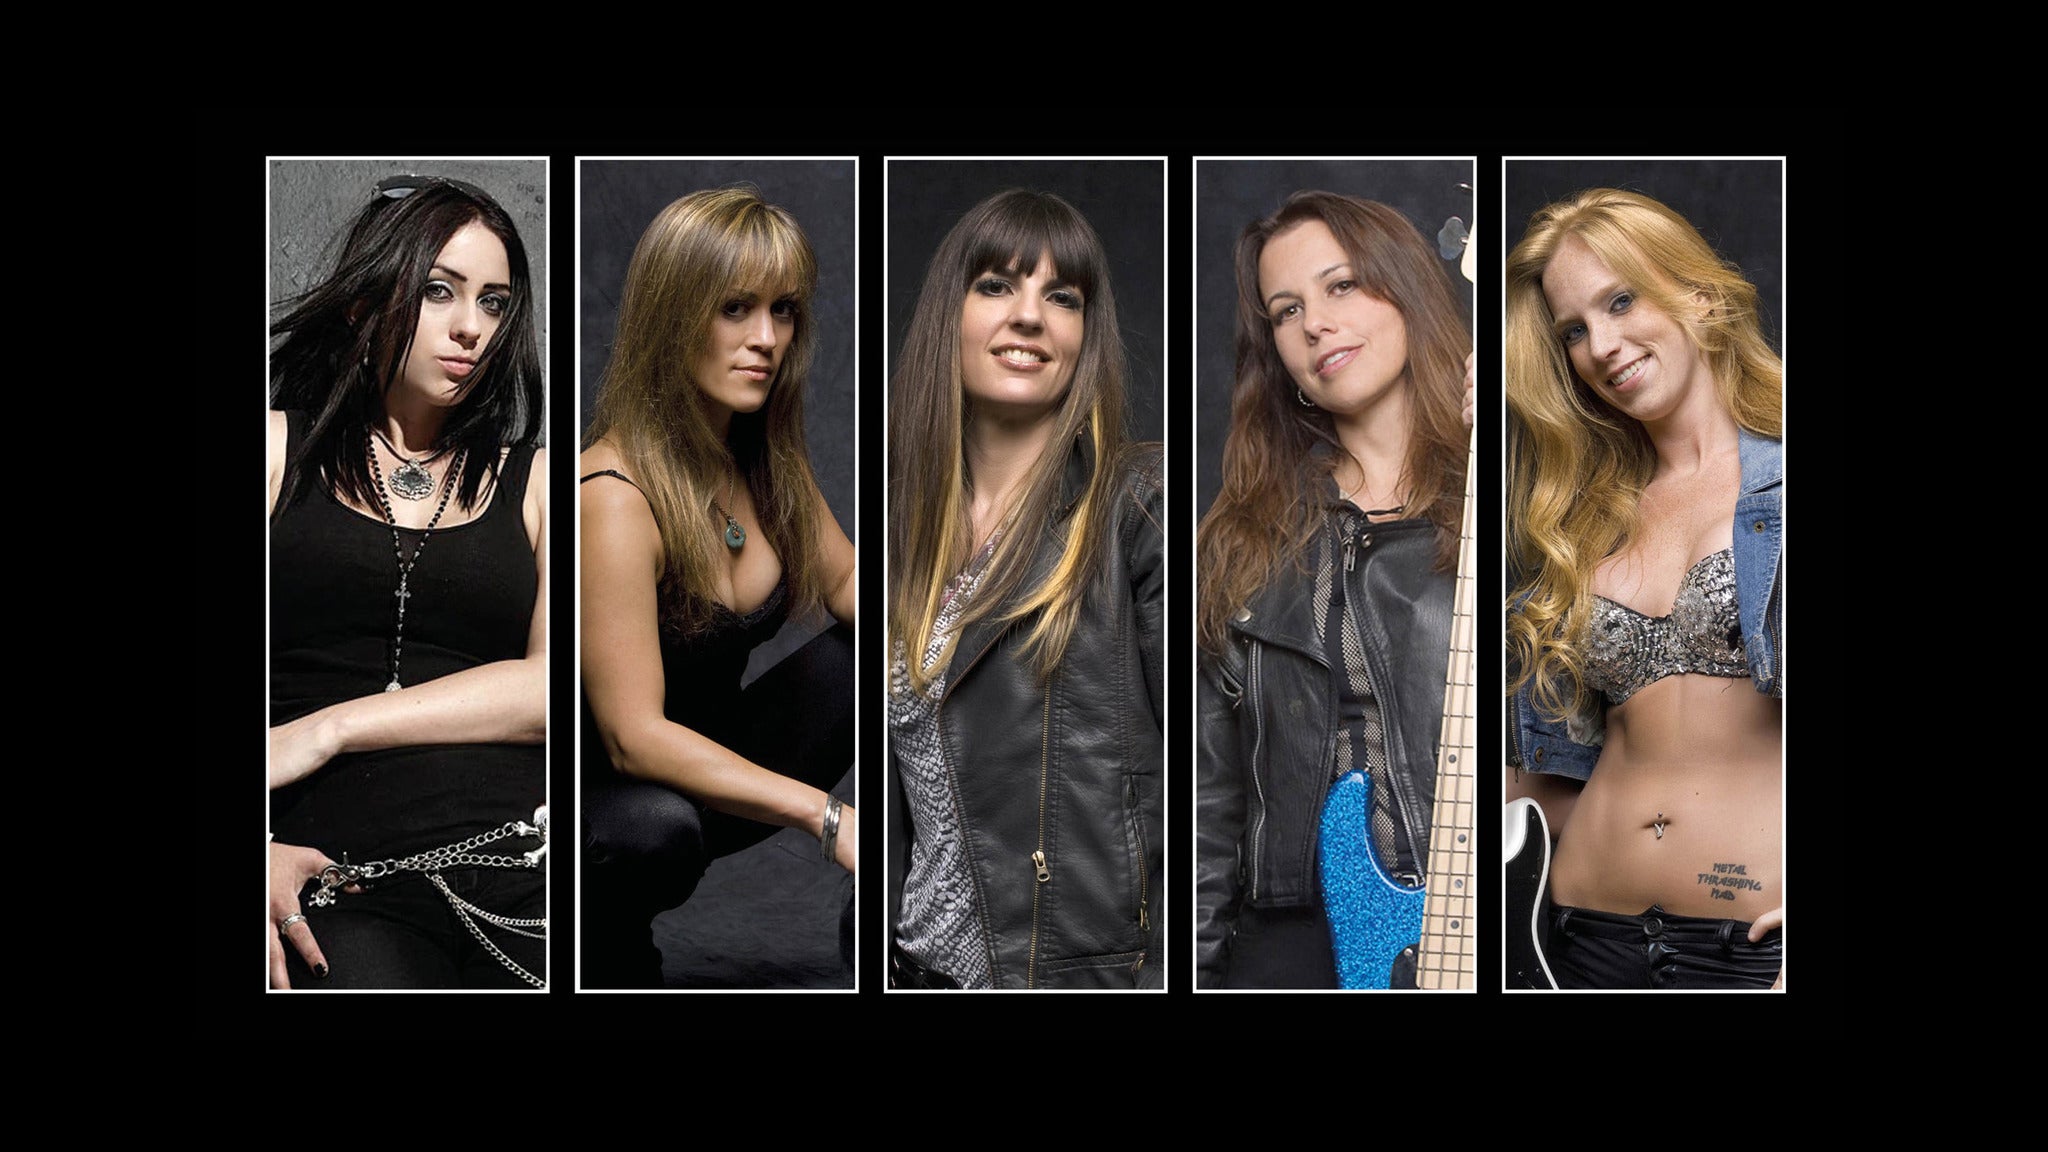 THE IRON MAIDENS - All Female Tribute to Iron Maiden